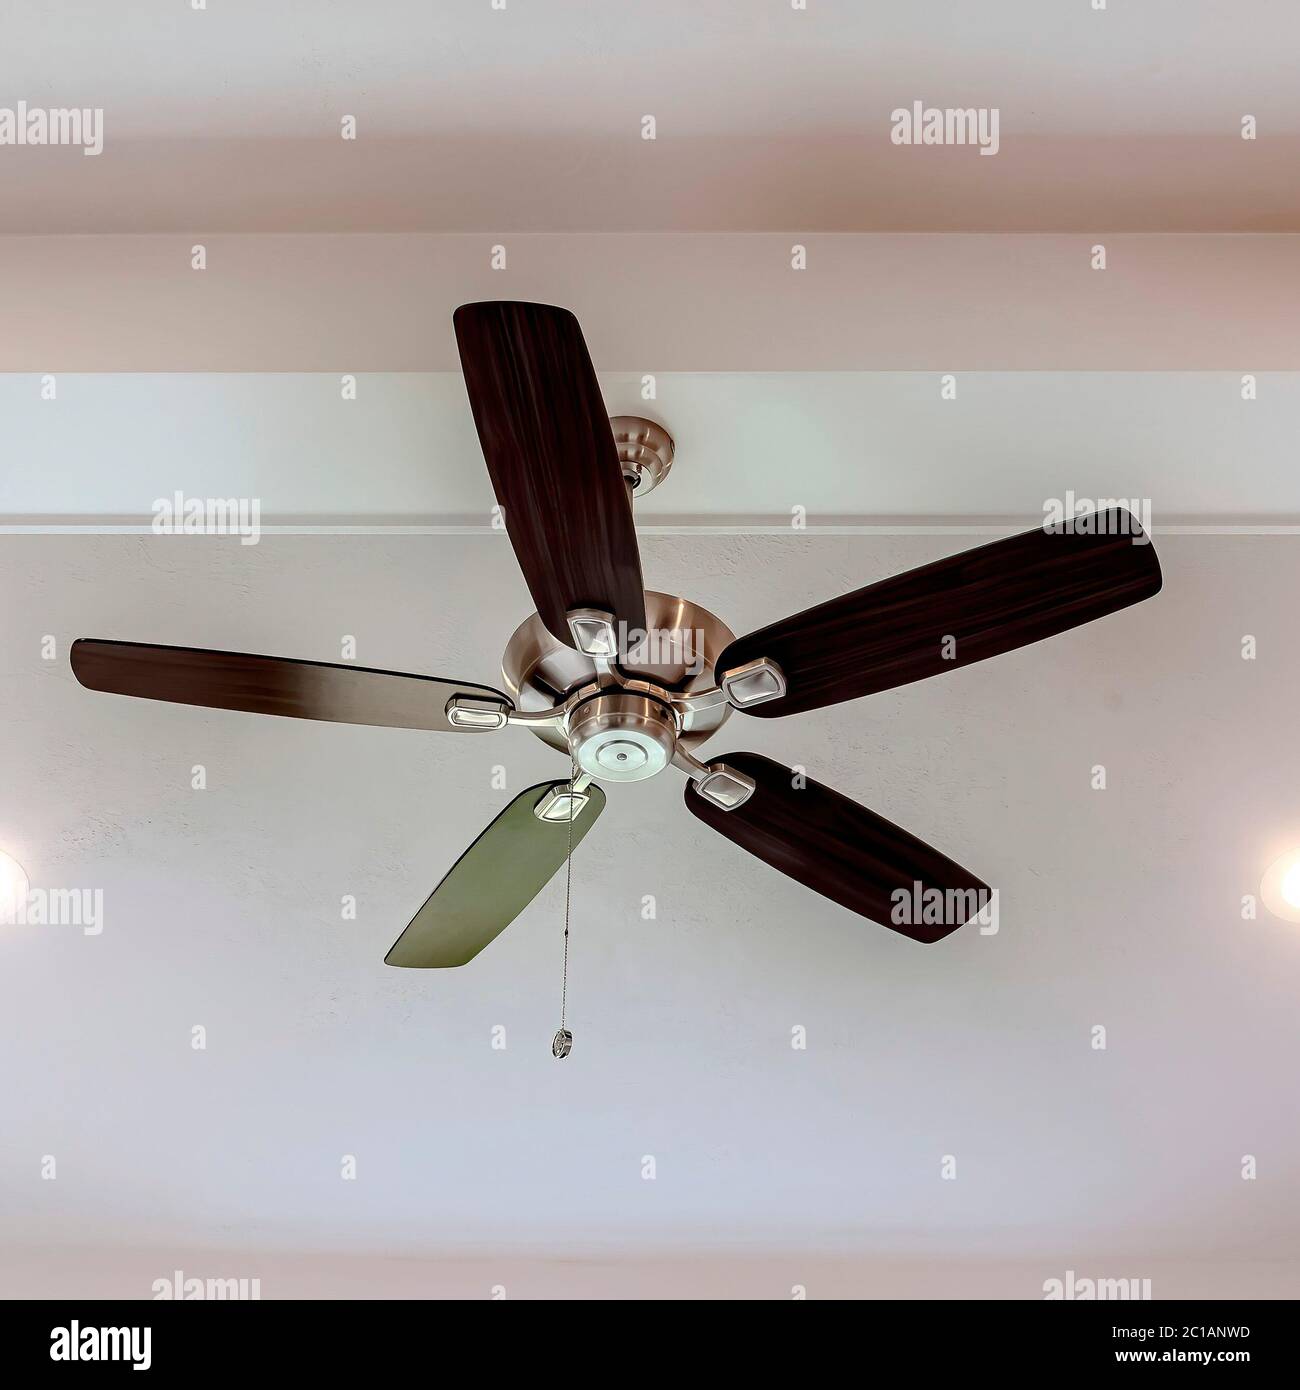 Square Ceiling fan with wood blades and built in lights on the ceiling beam of home Stock Photo